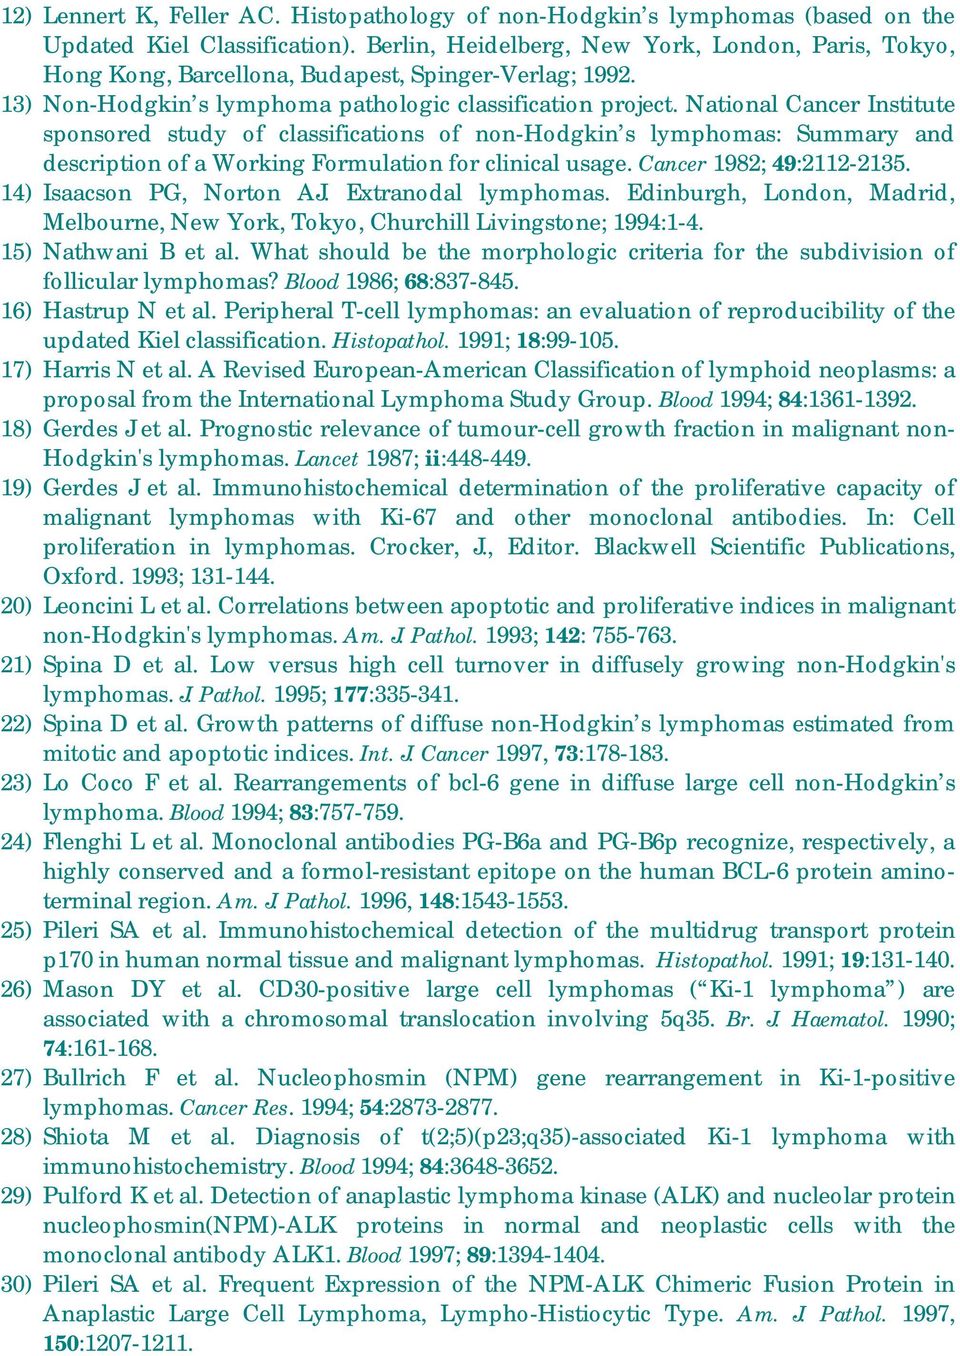 National Cancer Institute sponsored study of classifications of non-hodgkin s lymphomas: Summary and description of a Working Formulation for clinical usage. Cancer 1982; 49:2112-2135.